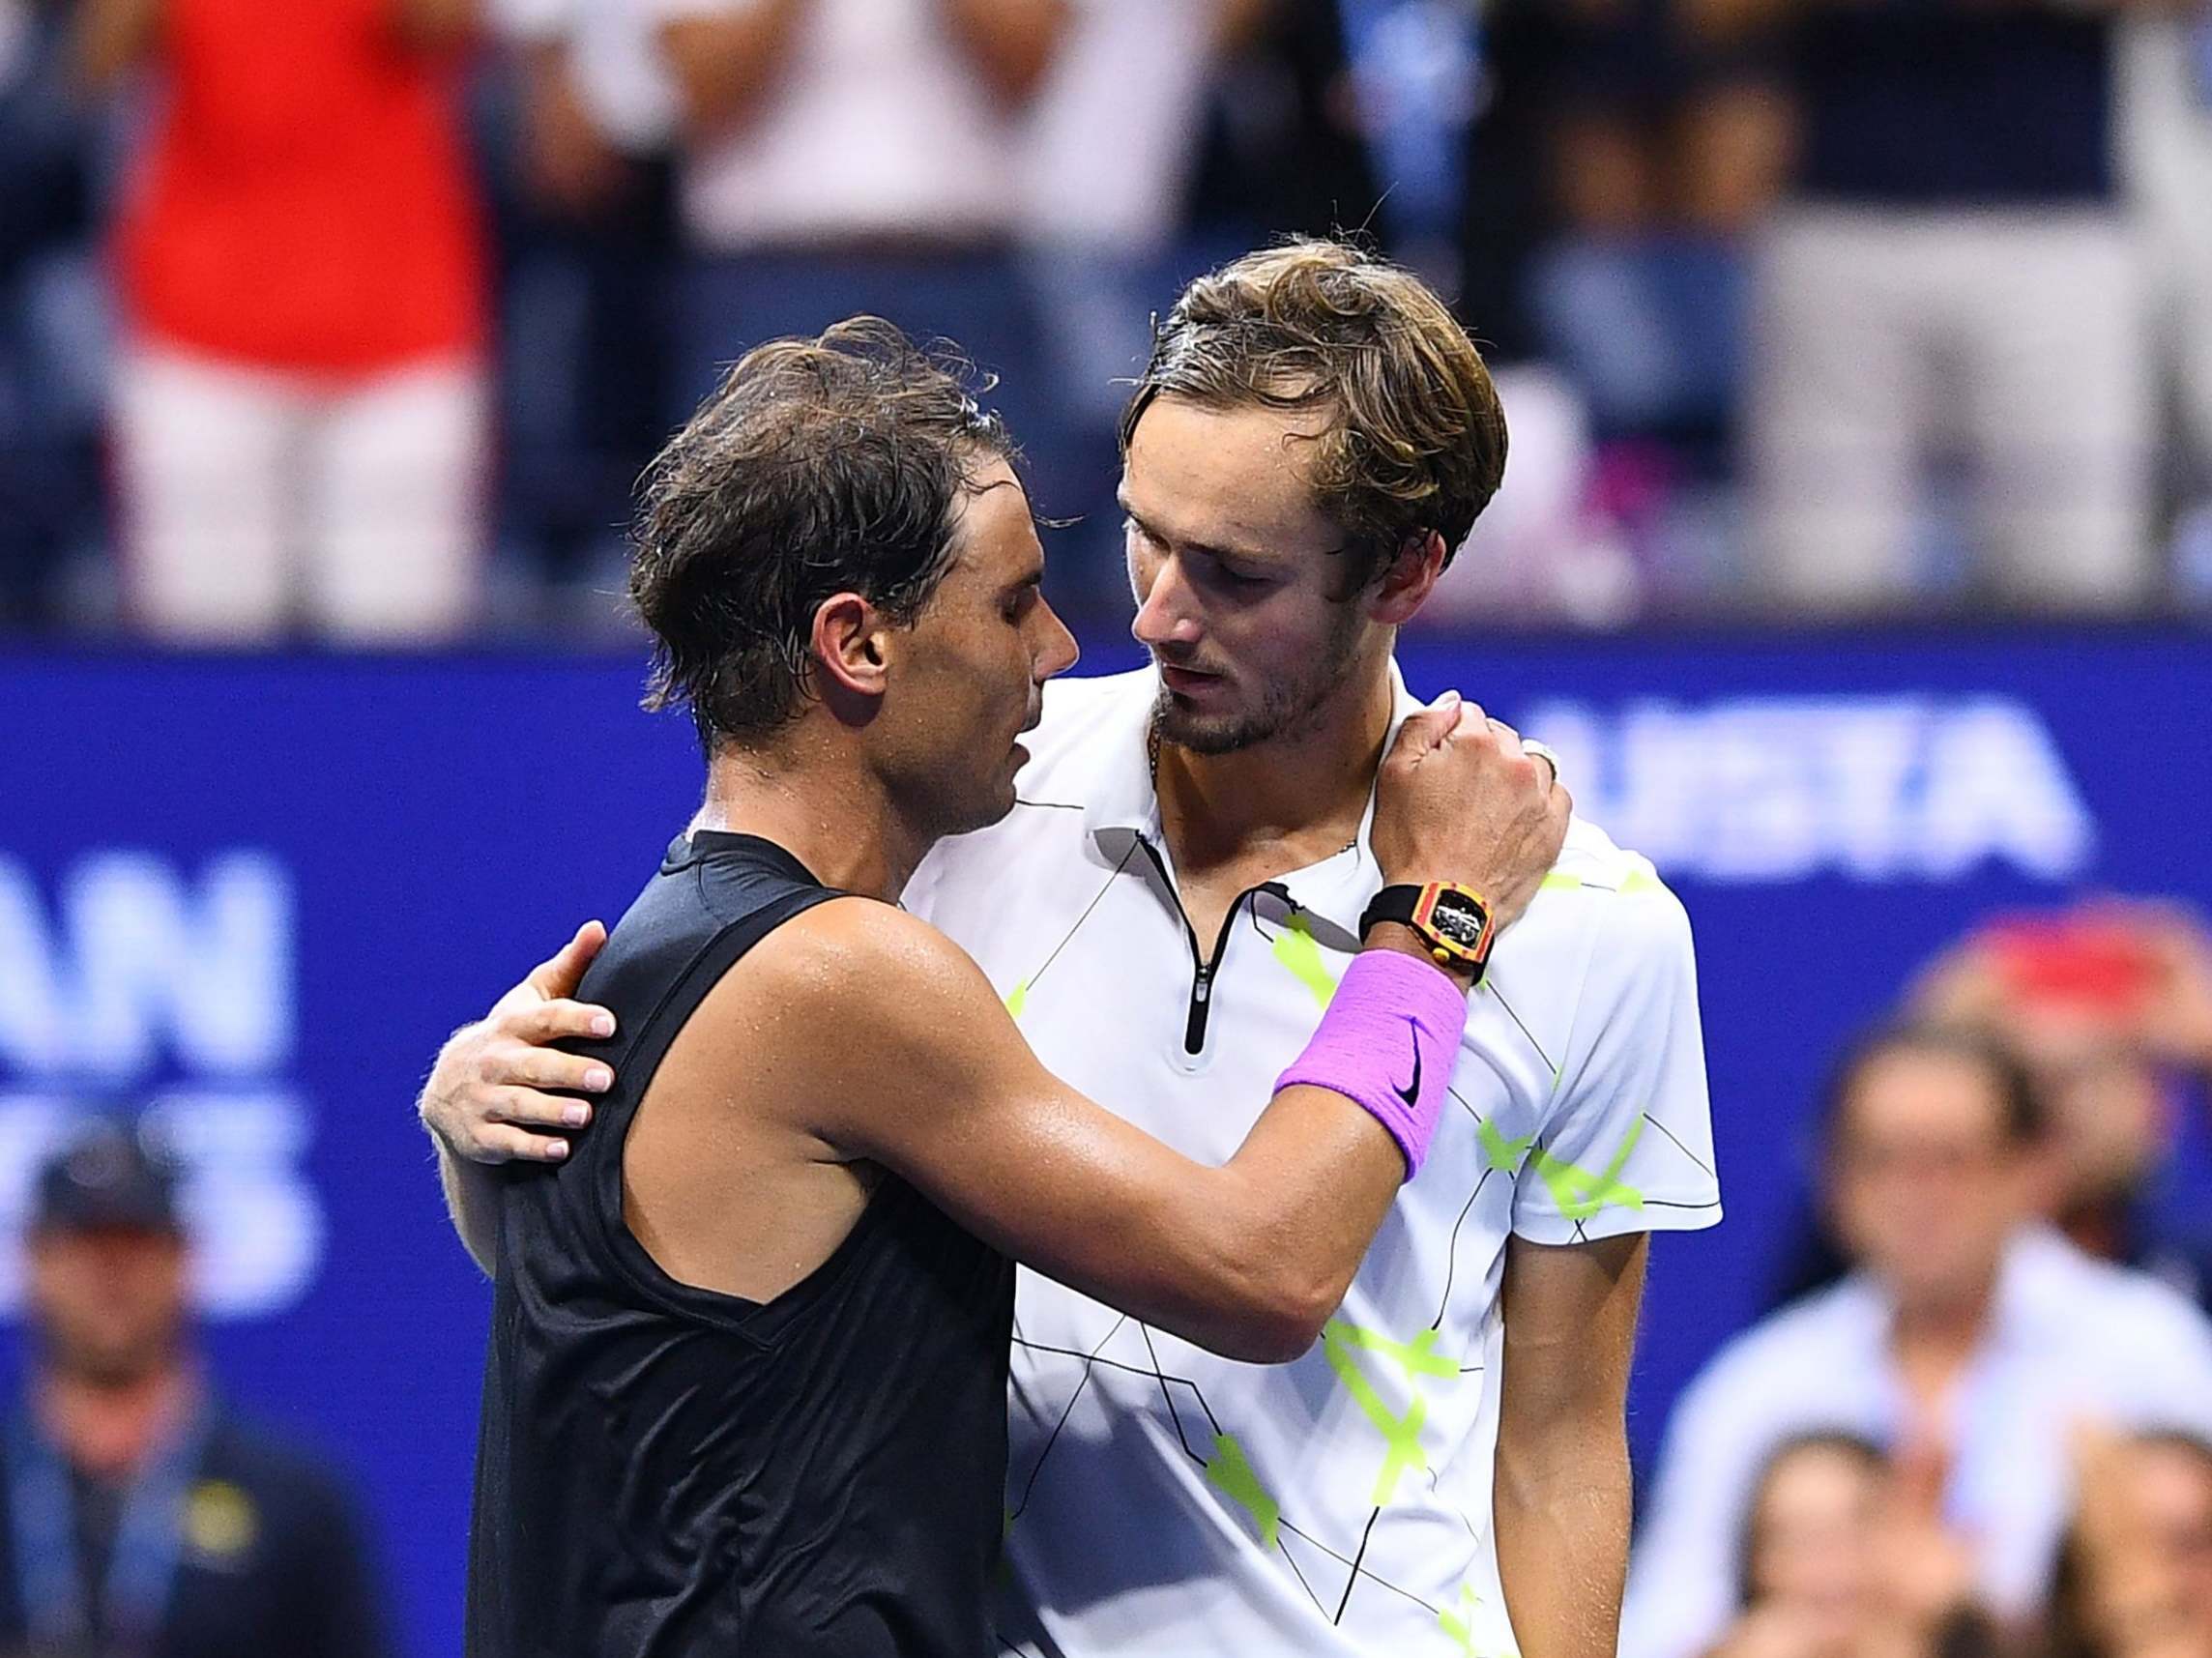 US Open 2019 Rafael Nadal defeats Daniil Medvedev in five-set thriller to win 19th Grand Slam The Independent The Independent